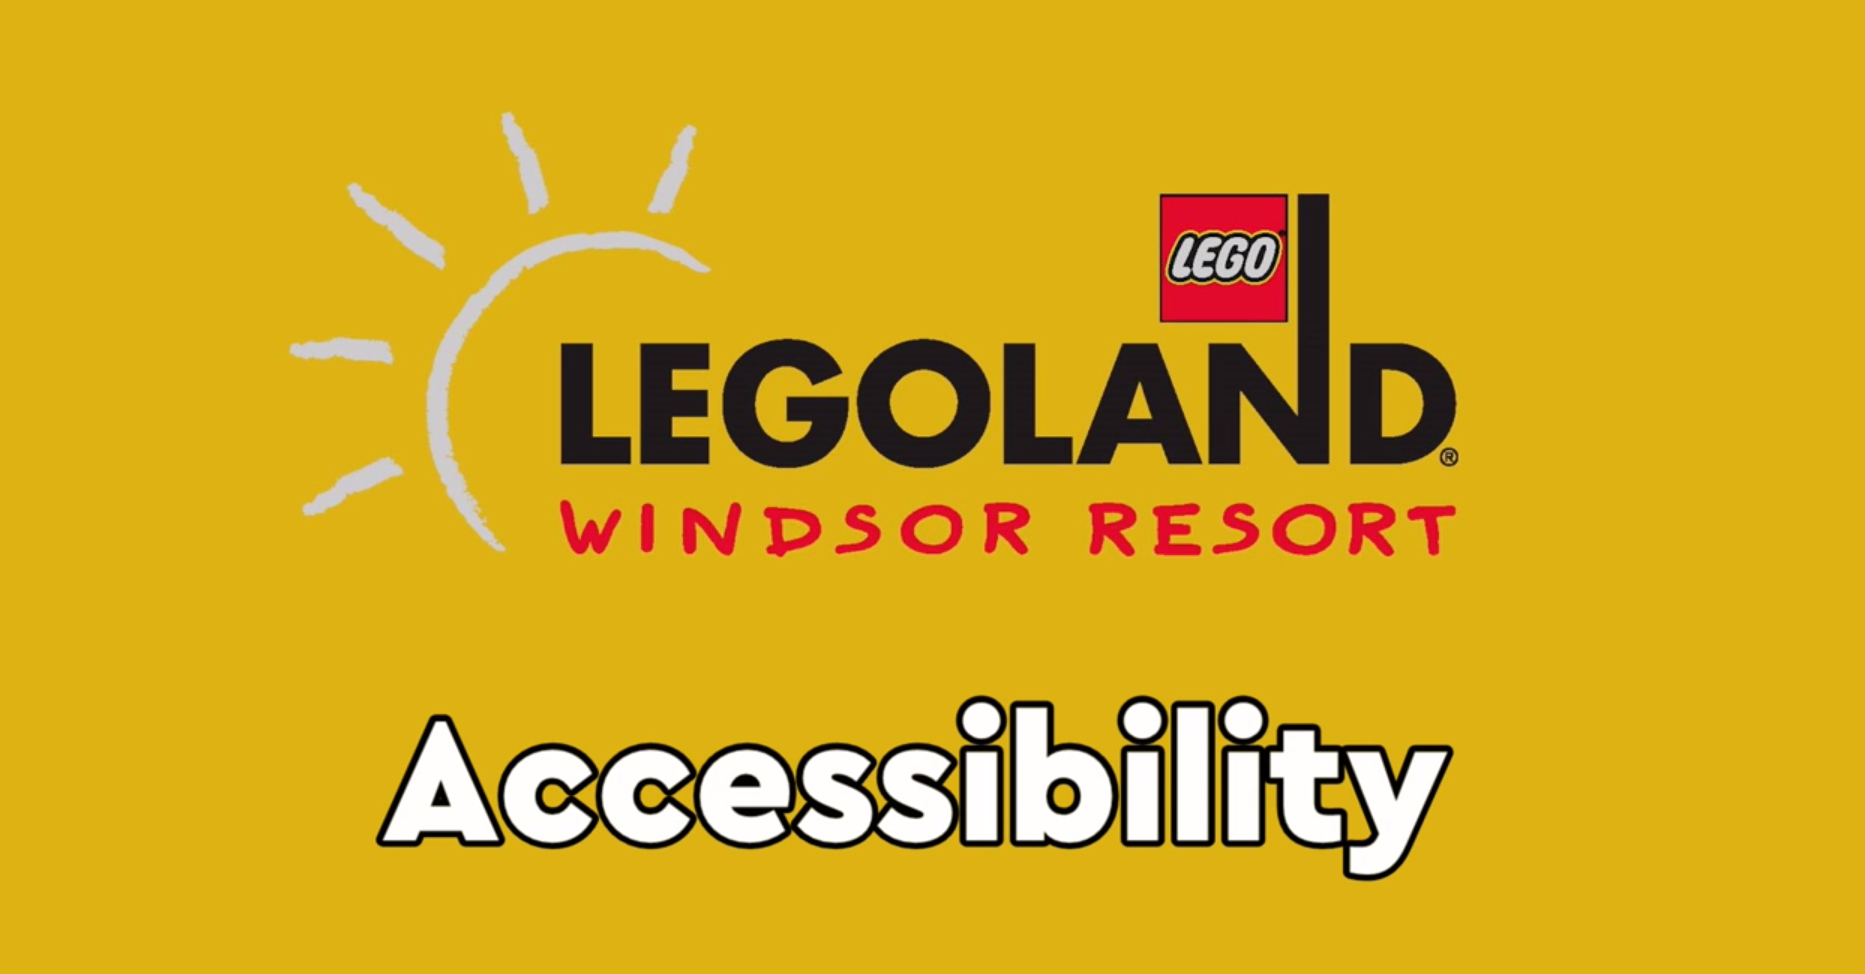 Accessibility at the LEGOLAND Windsor Resort